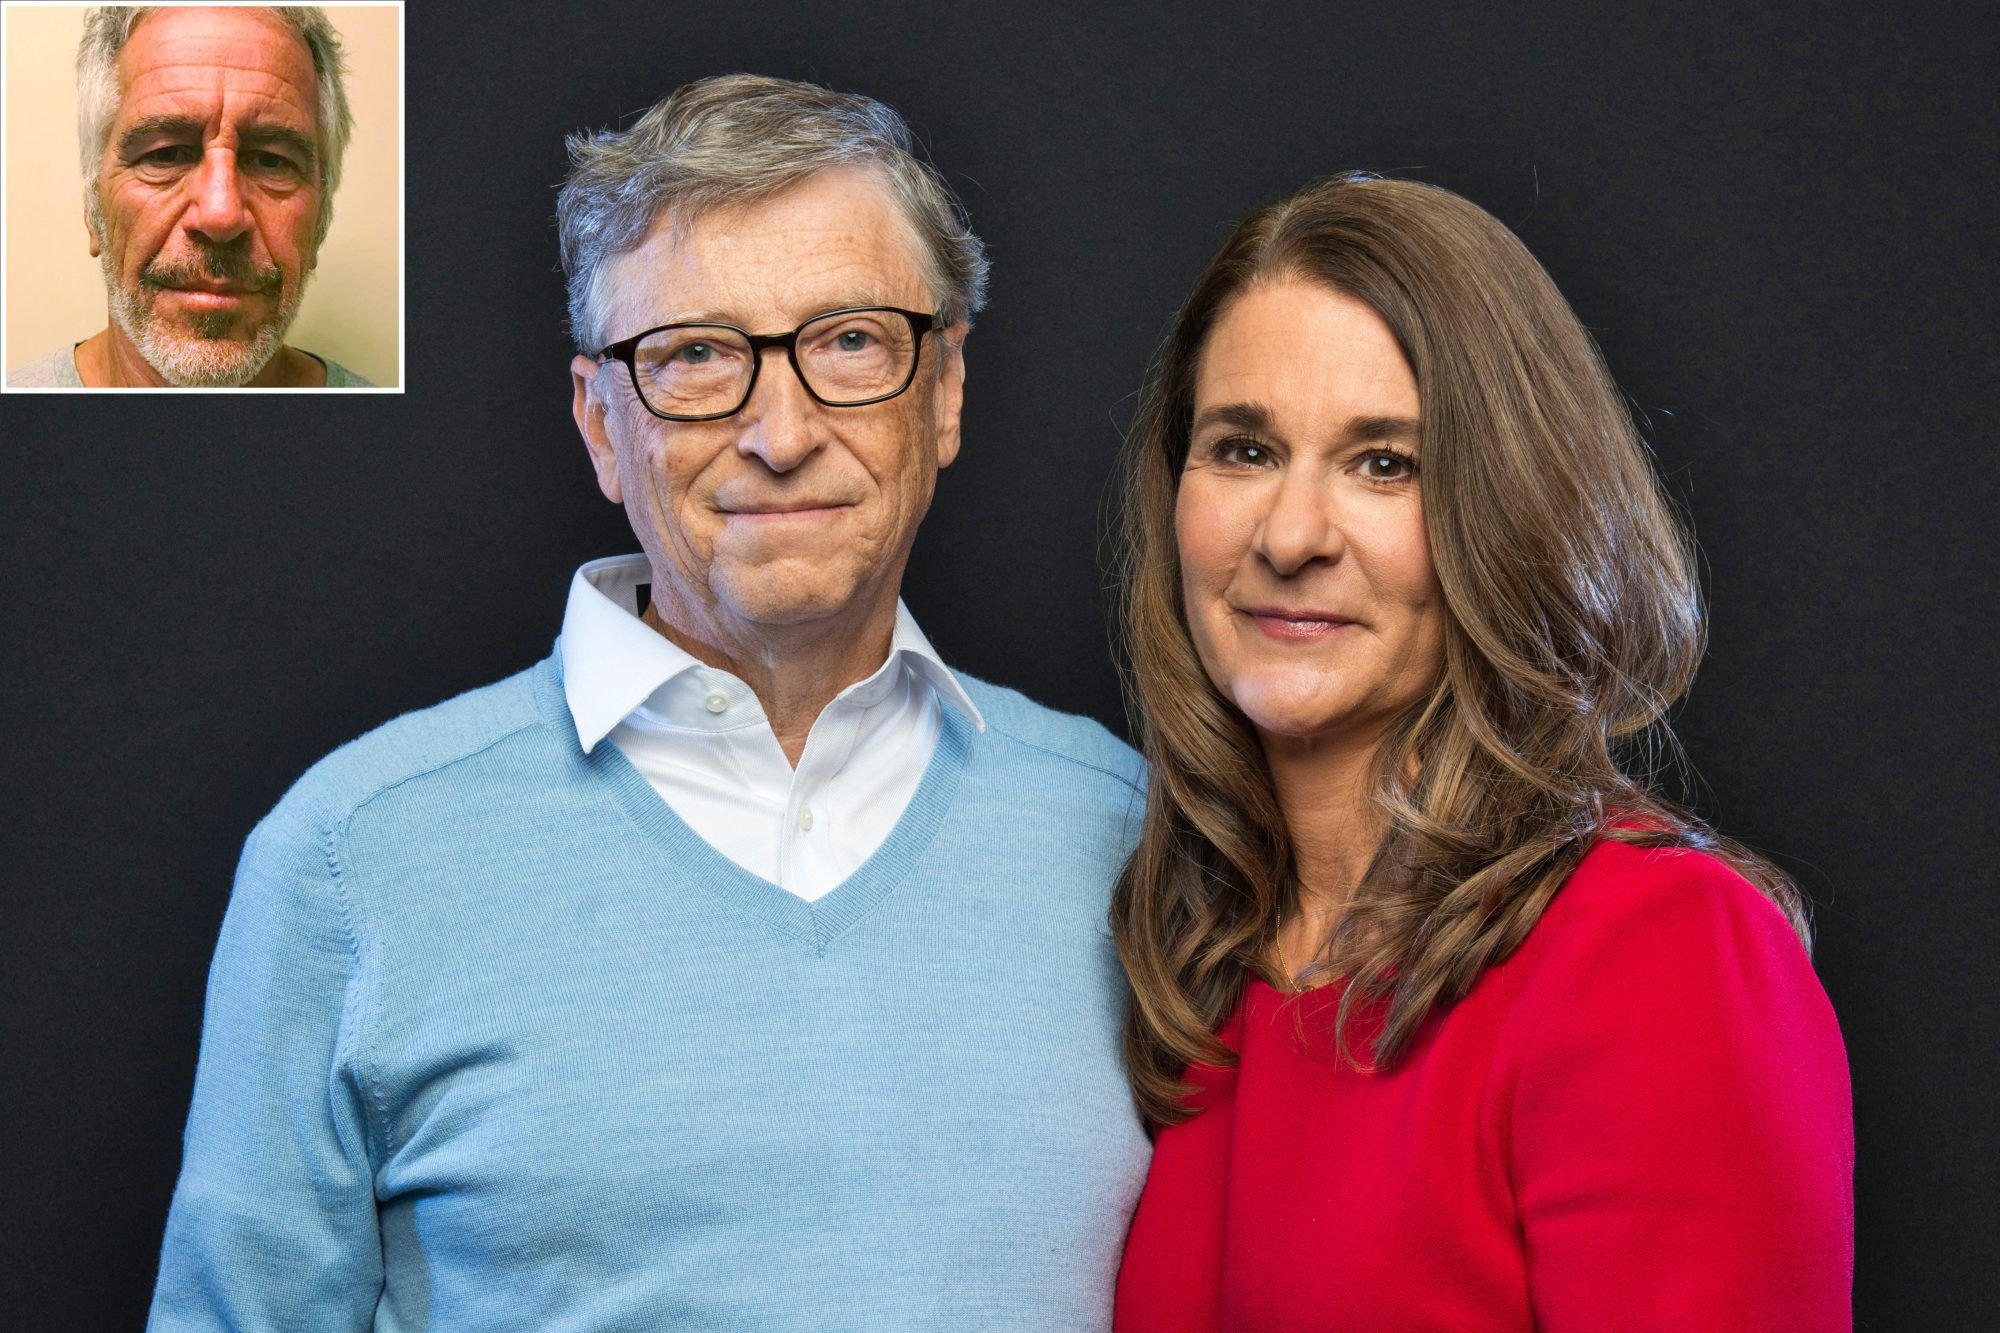 Bill Gates' Meetings with Jeffrey Epstein Are a 'Sore Spot' for Melinda Gates, Says Source